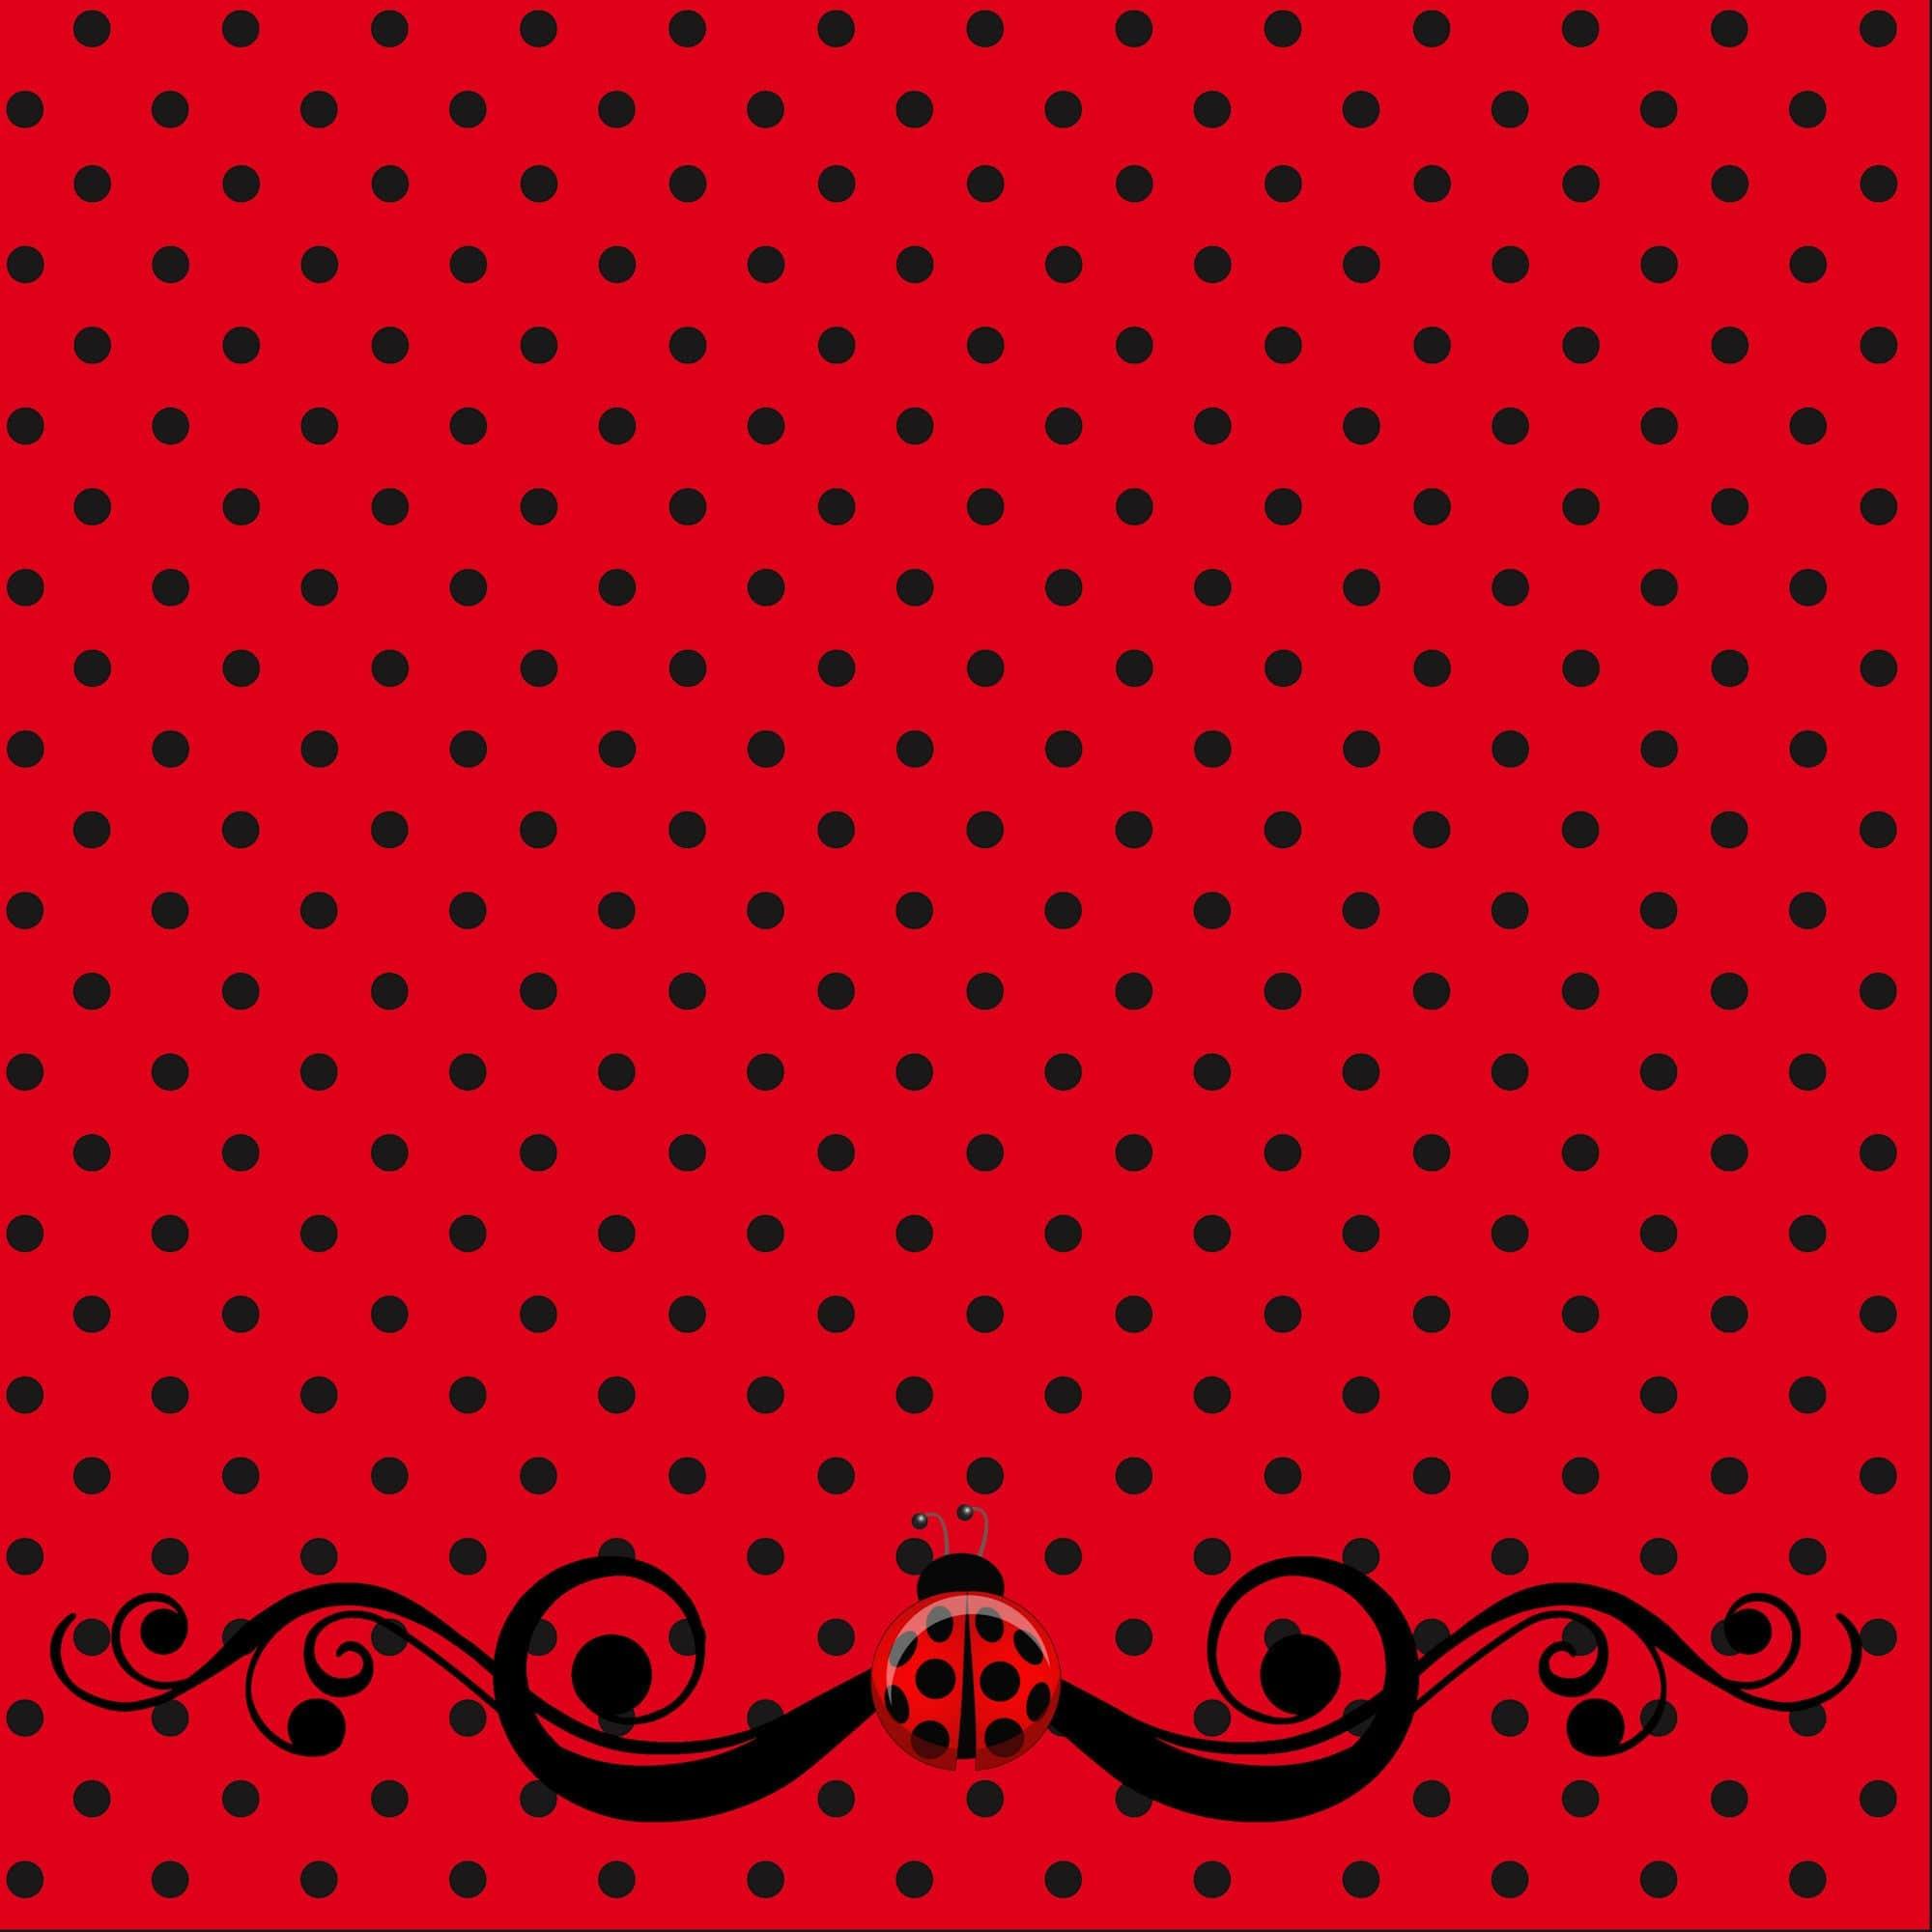 Ladybug Love Collection Peace Out 12 x 12 Double-Sided Scrapbook Paper by SSC Designs - Scrapbook Supply Companies